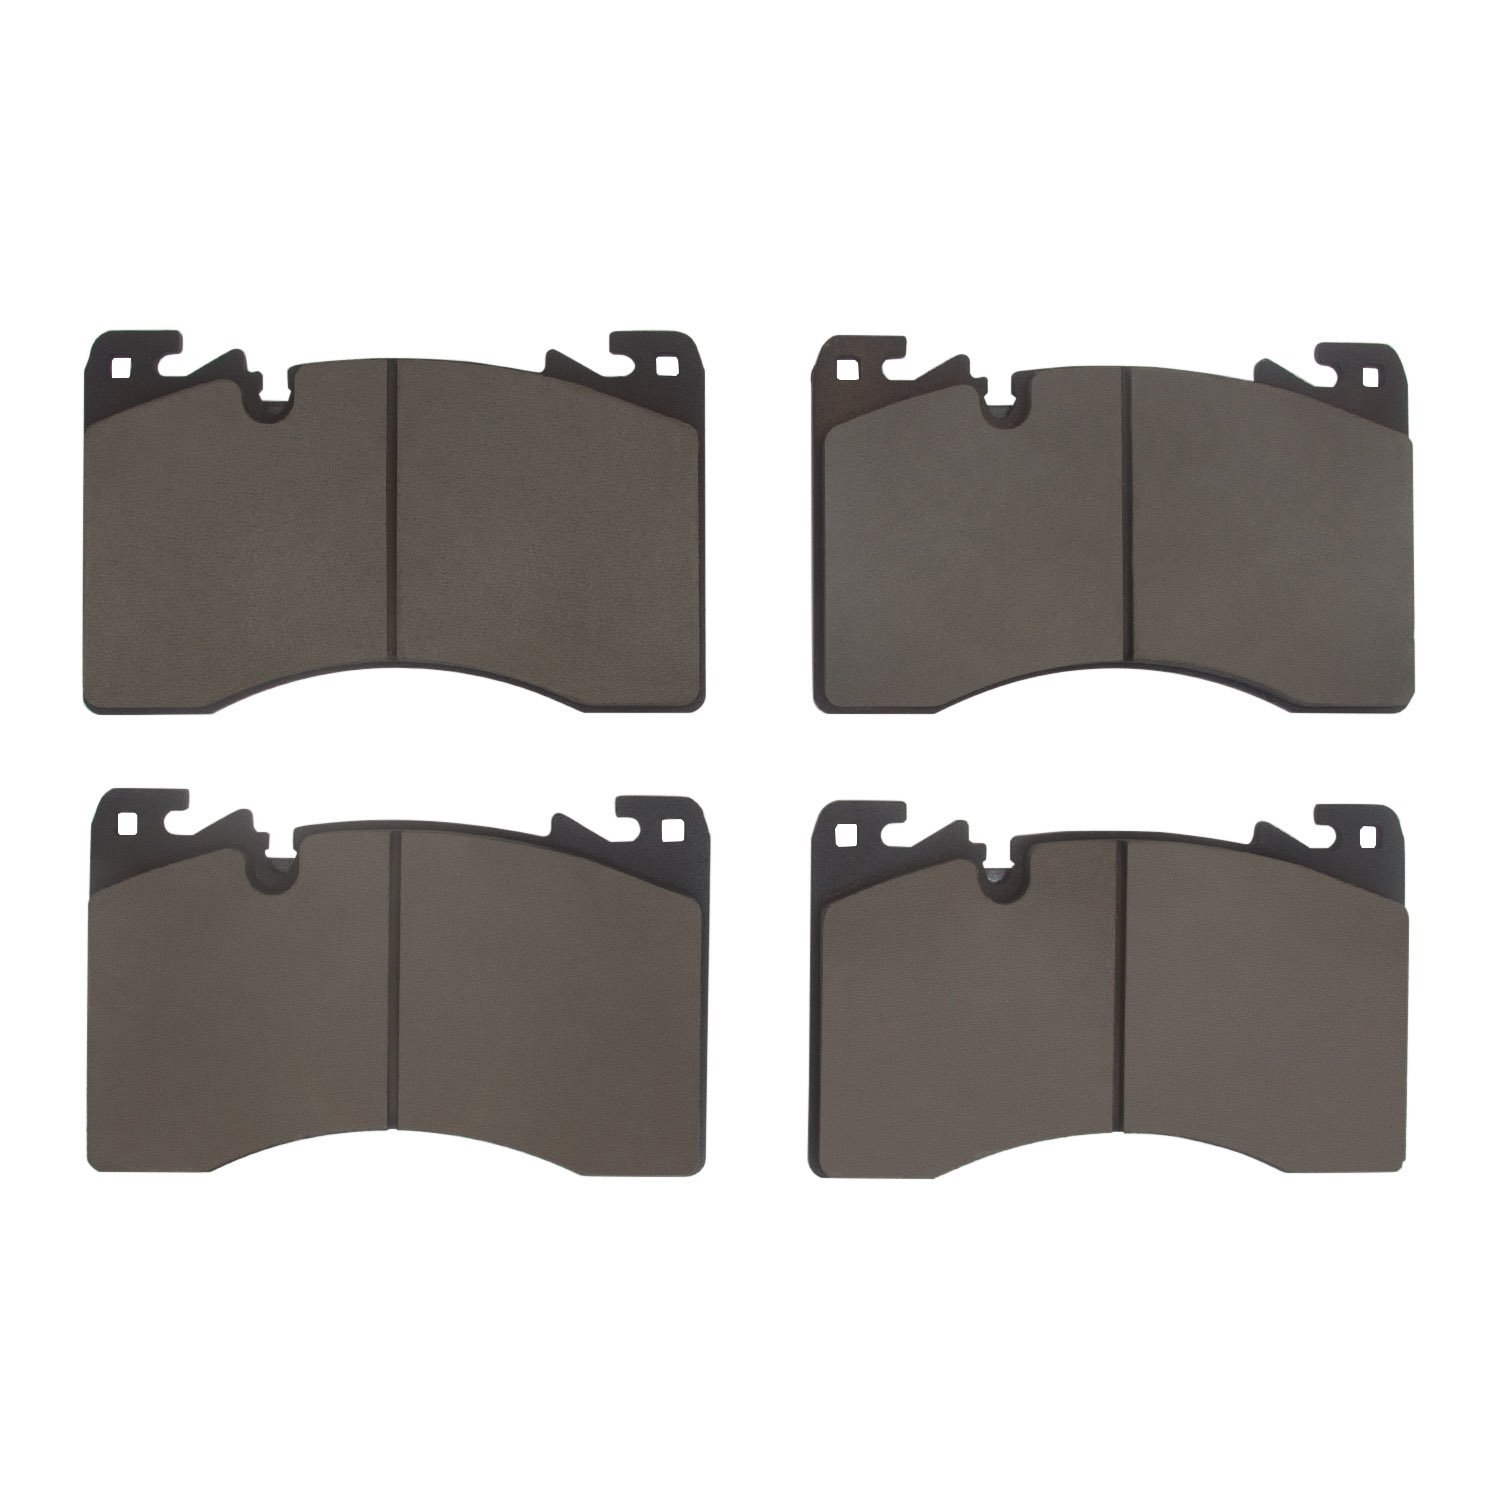 1600-2461-00 5000 Euro Ceramic Brake Pads, Fits Select Land Rover, Position: Front